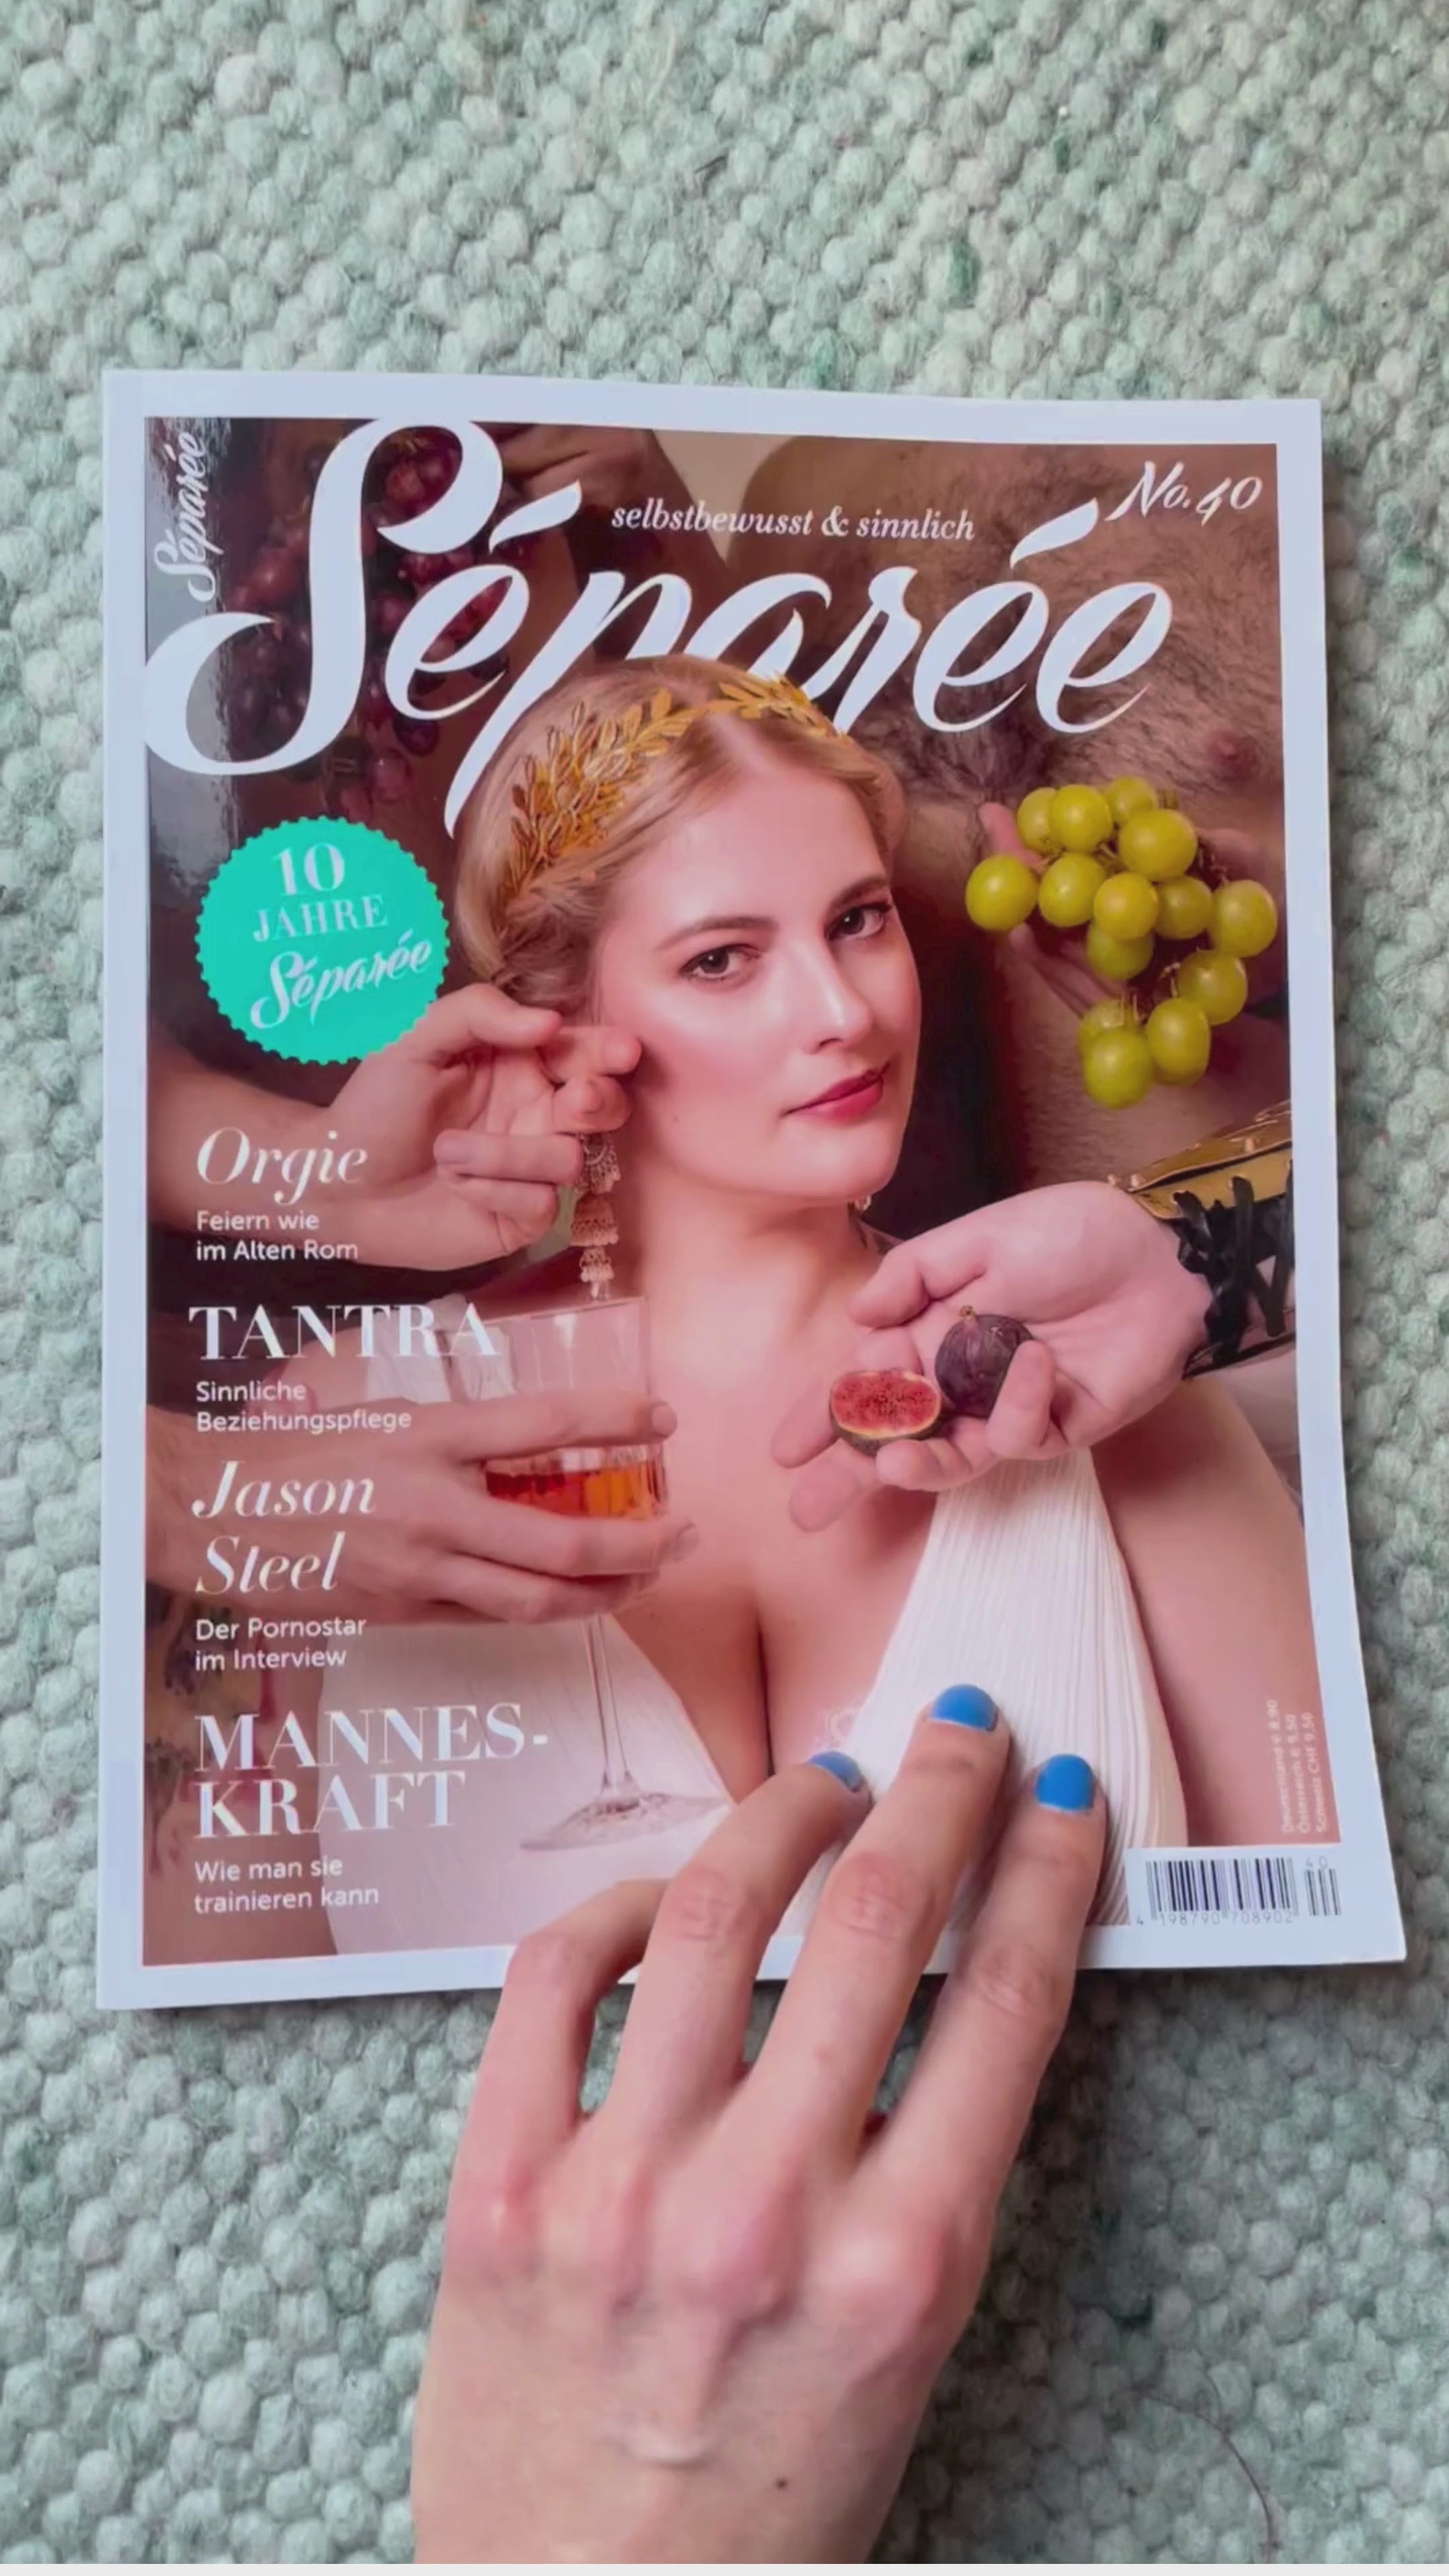 Video laden: Separee Magazine is opened and a display of all soaps is shown